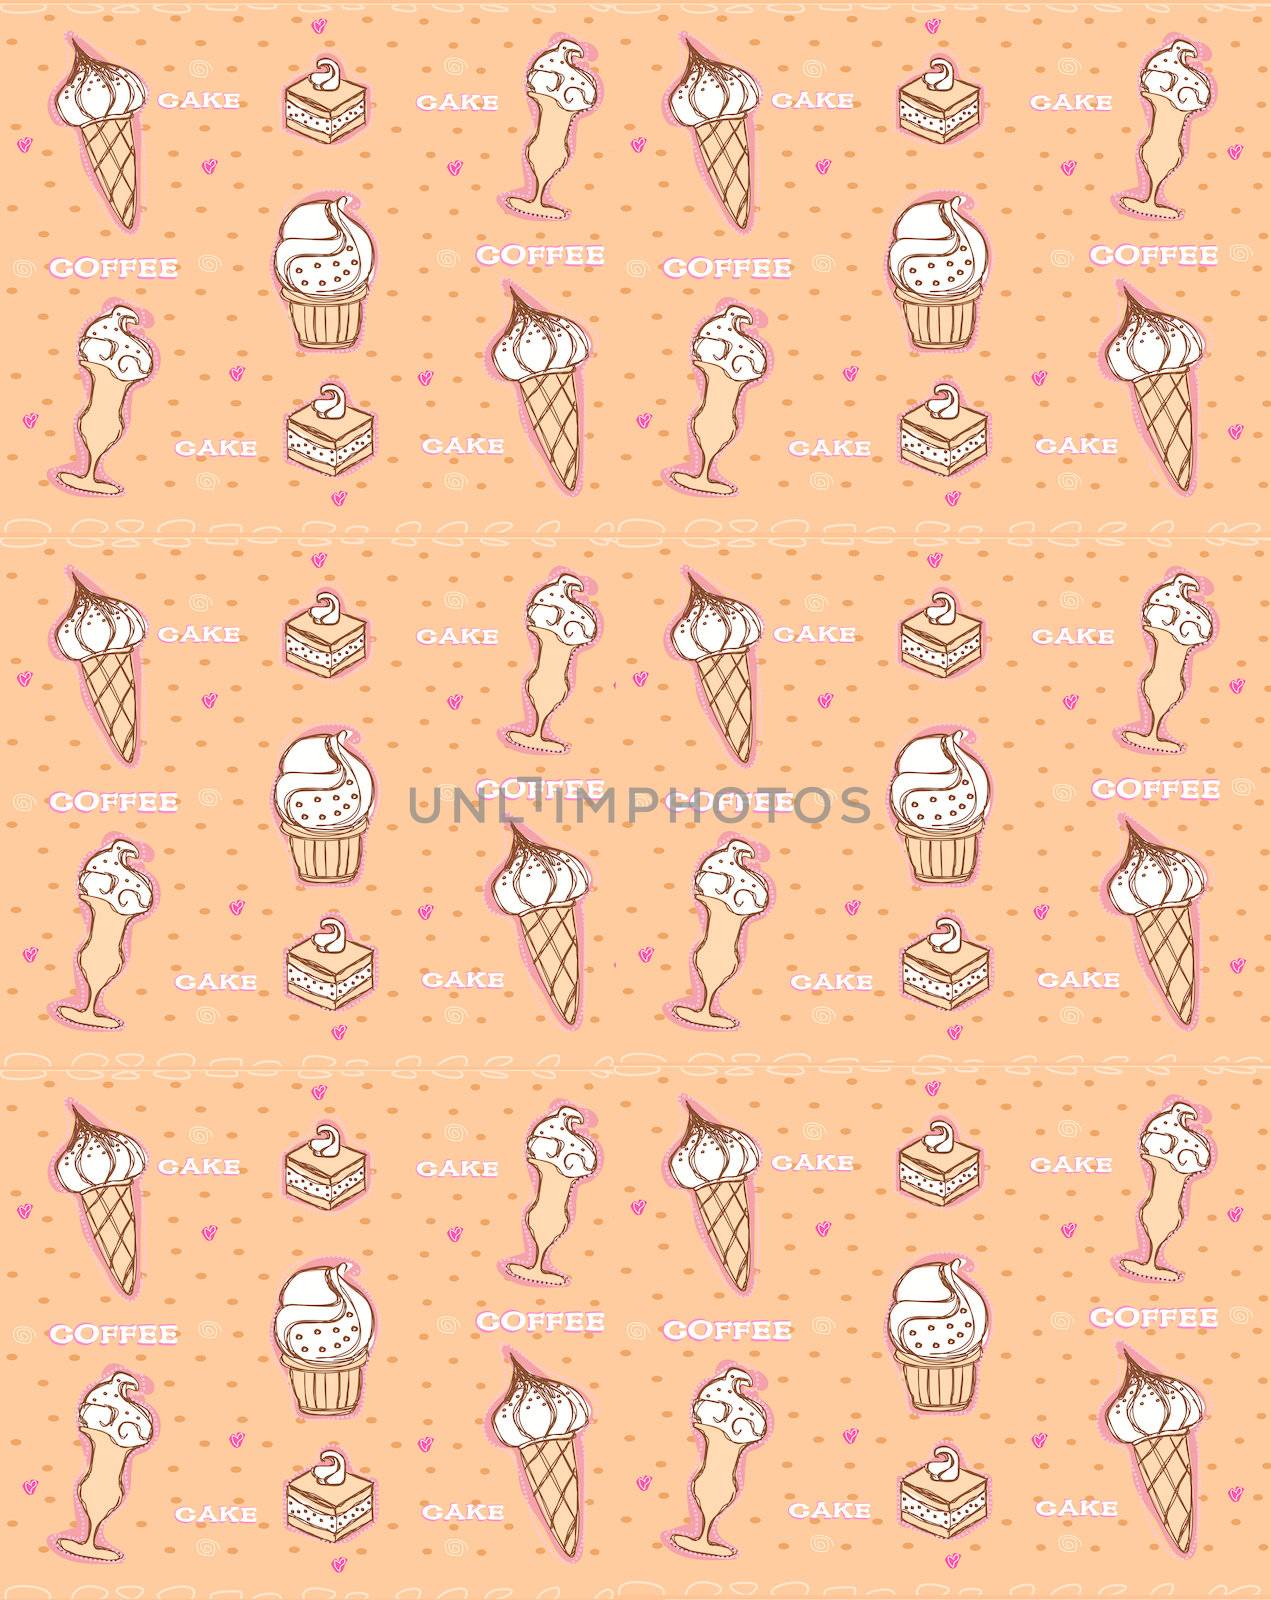 coffee and cakes seamless background pattern by JackyBrown